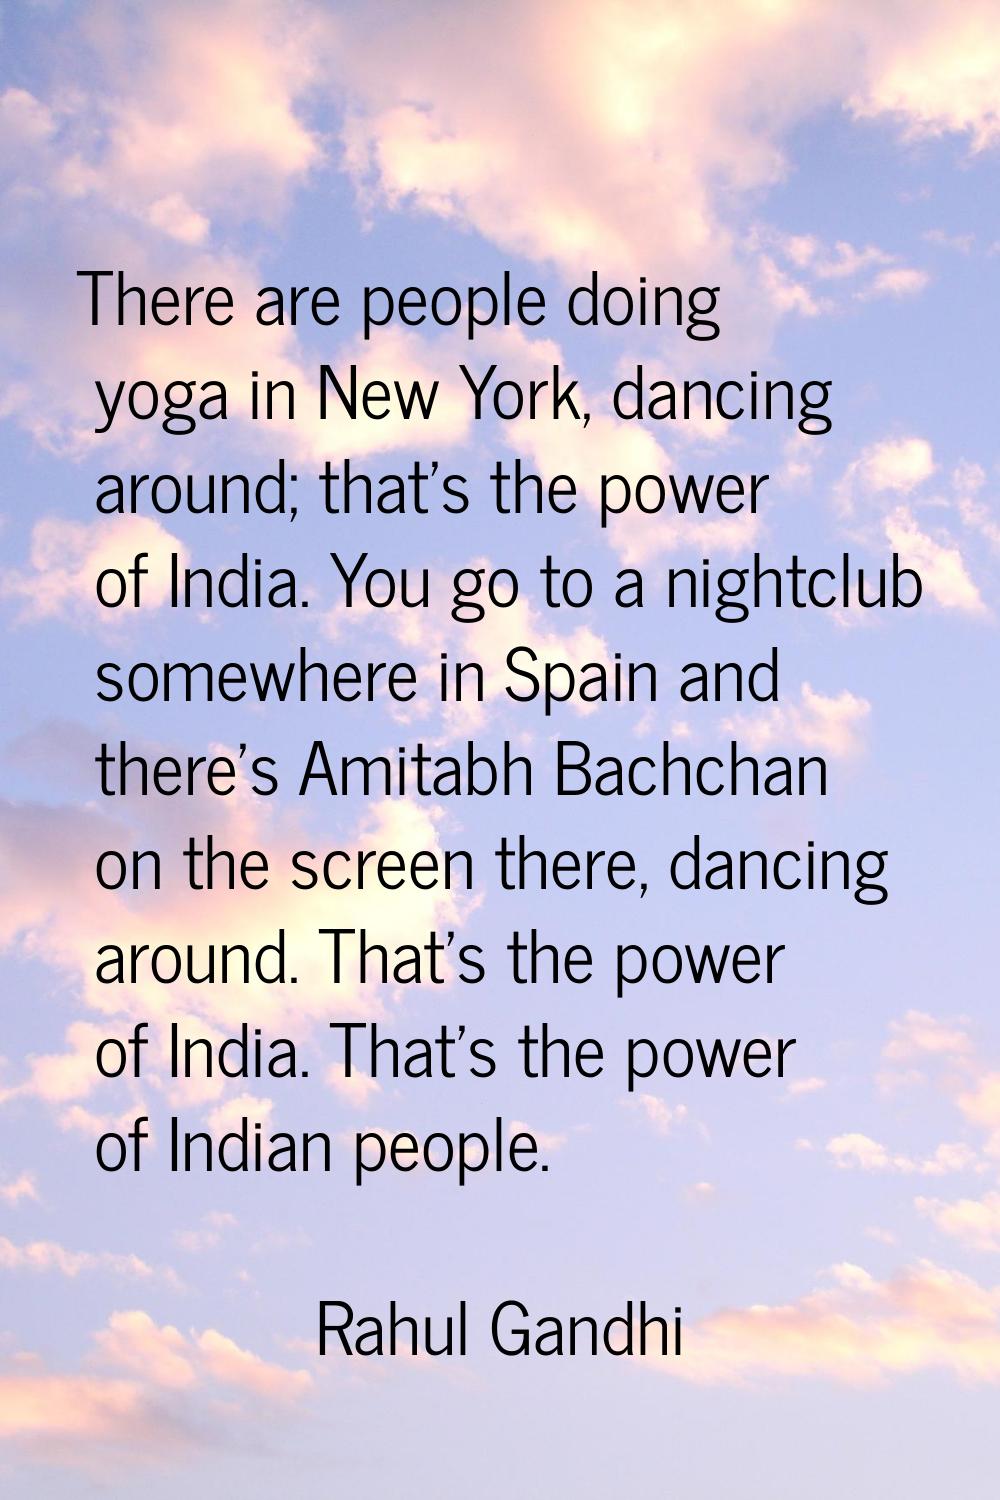 There are people doing yoga in New York, dancing around; that's the power of India. You go to a nig